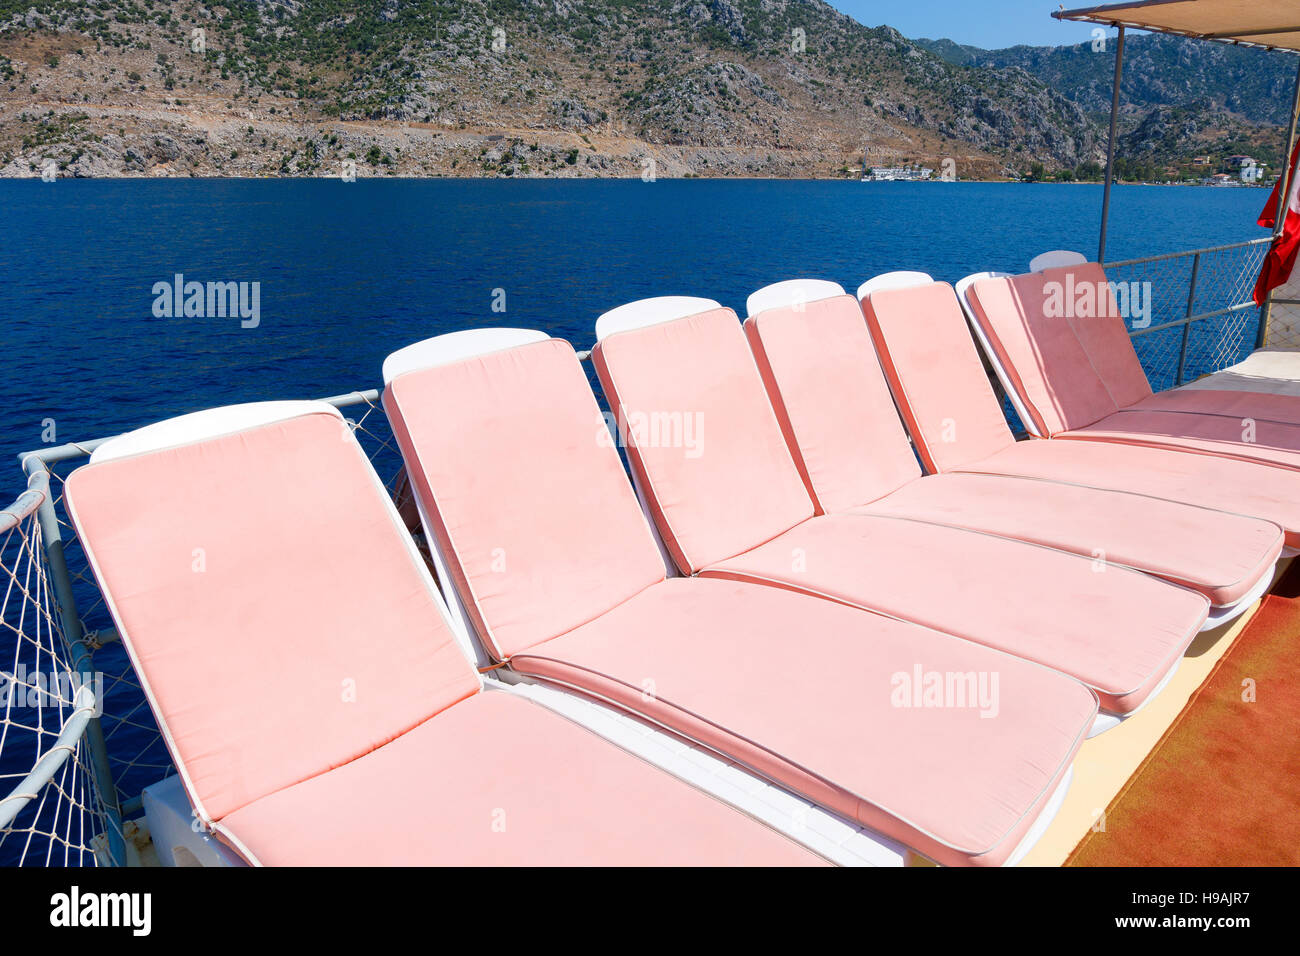 Pink sun beds on a boat in the sea, Turkey Stock Photo